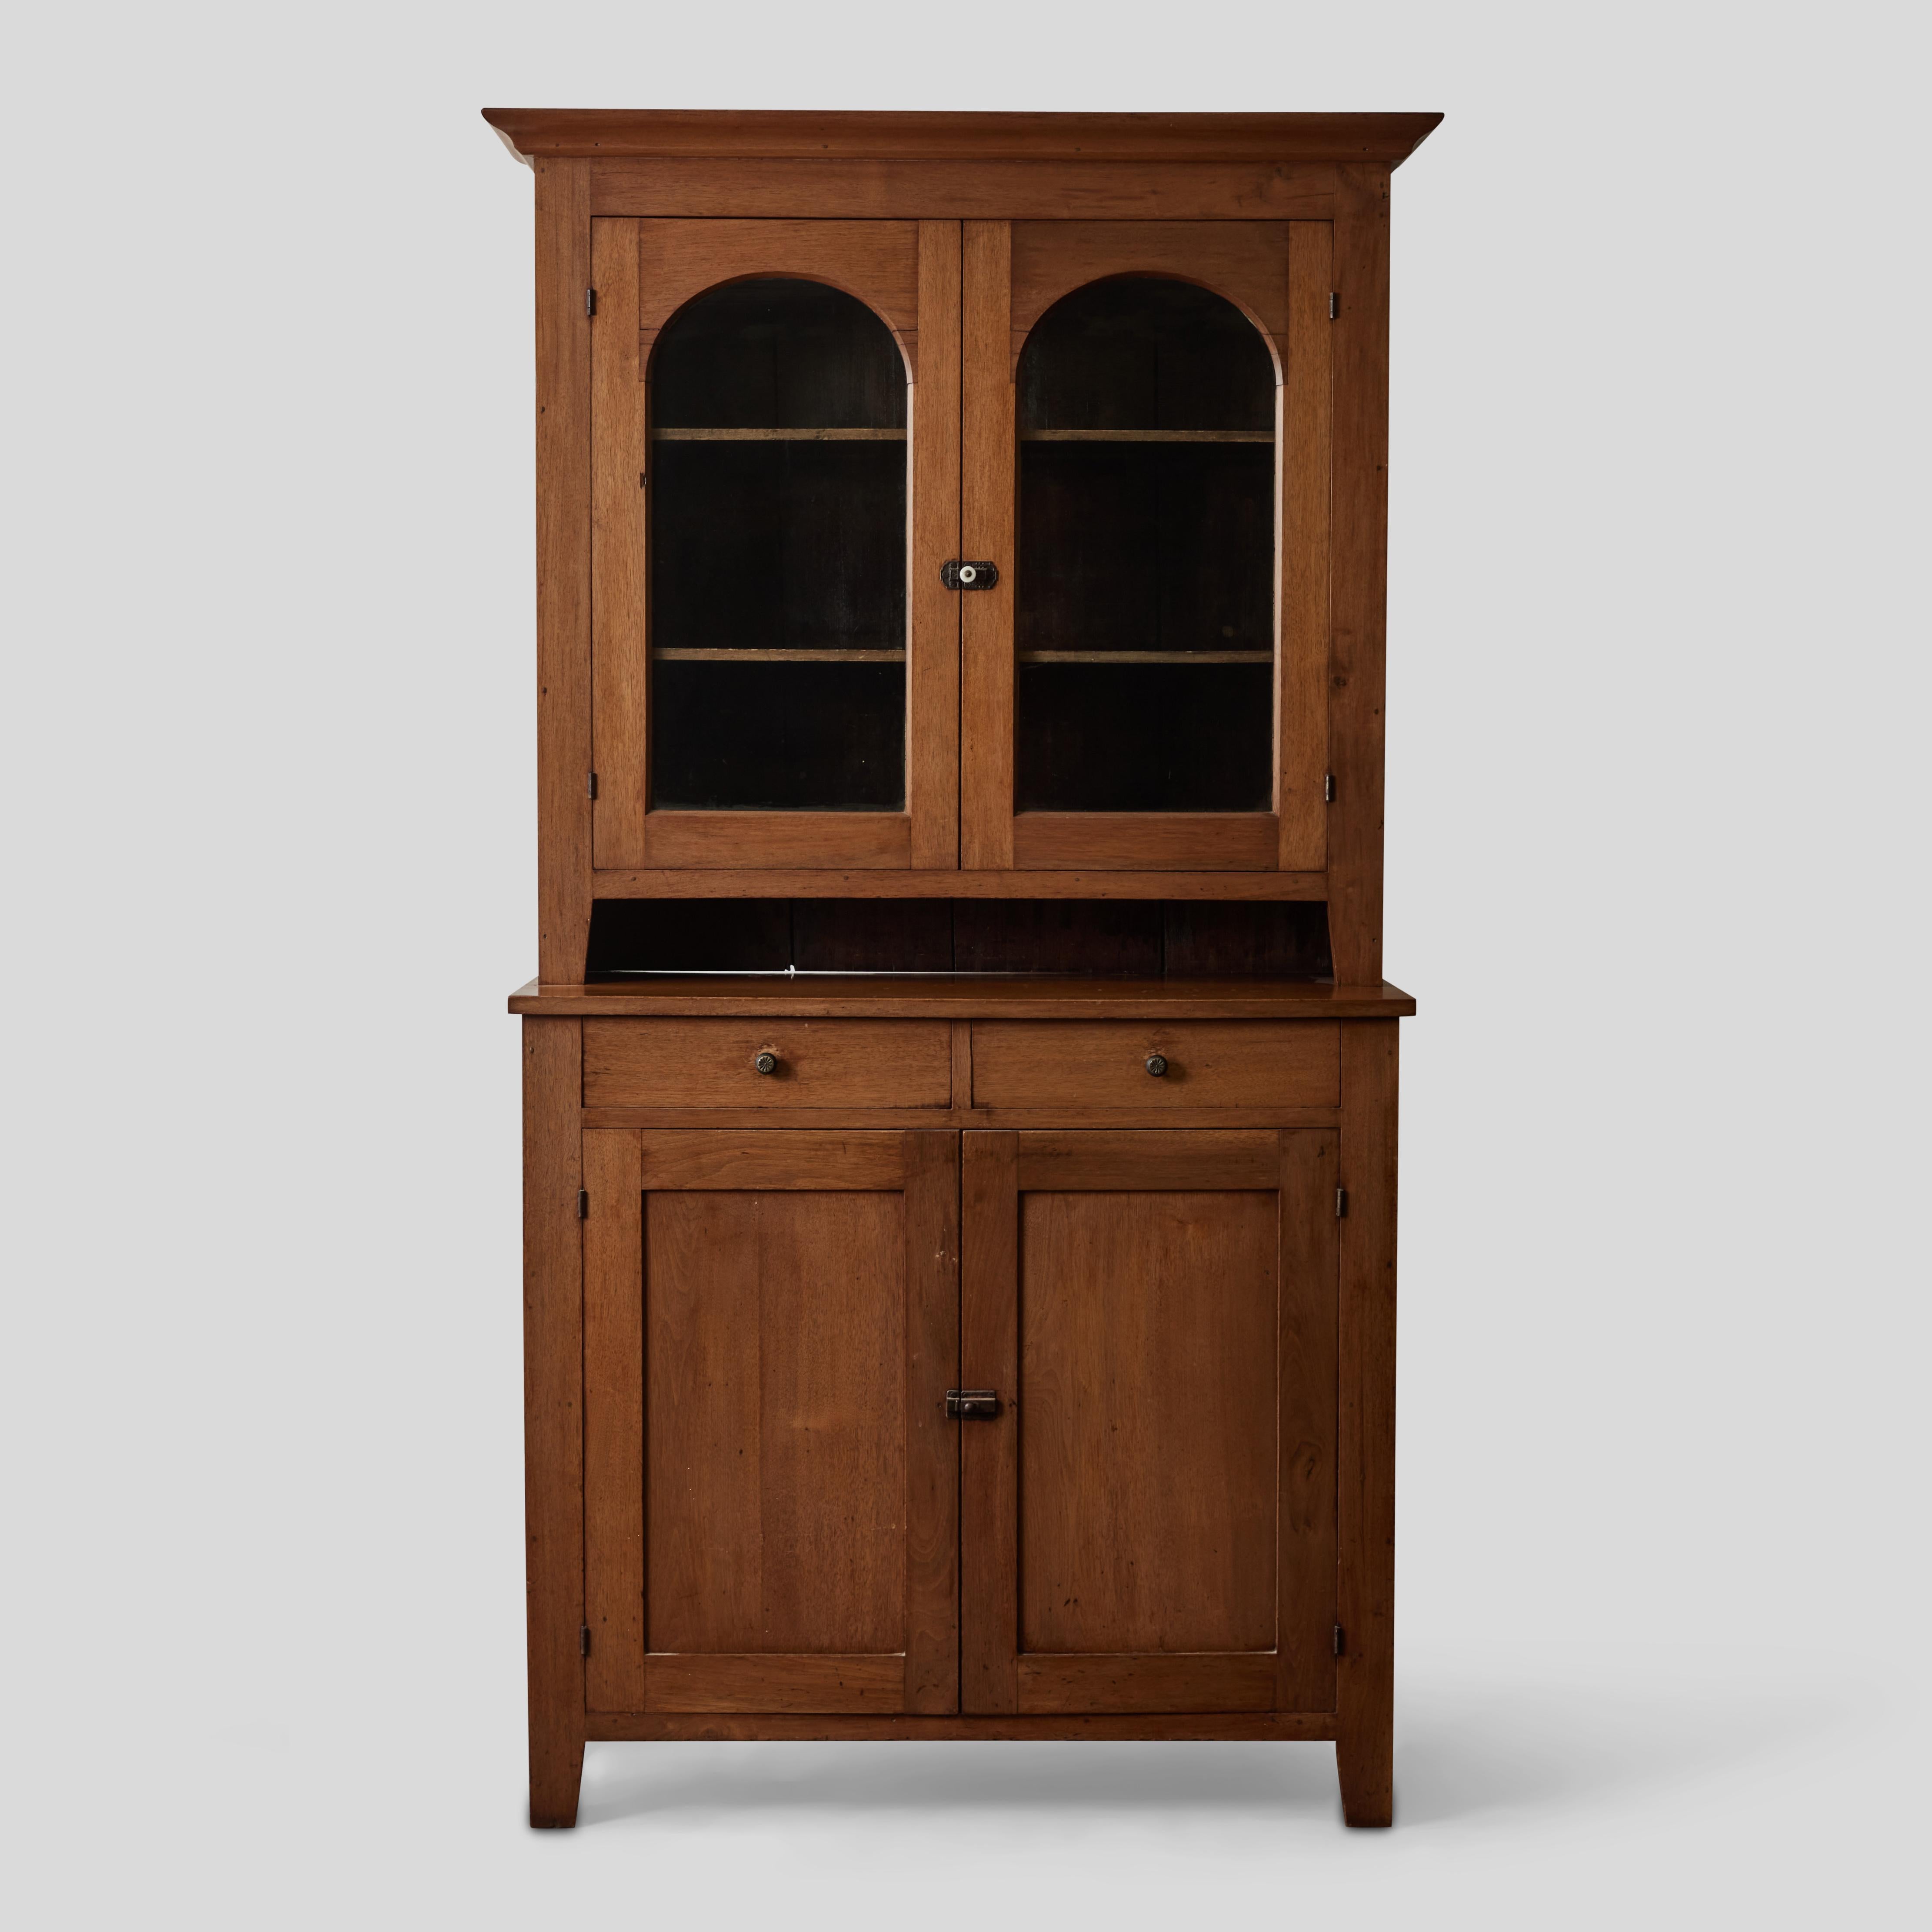 Late 19th-century Craftsman-style hutch or bookcase in mahogany. The upper section features a simple molded cornice, two adjustable shelves, and two cabinet doors inset with dome-shaped windows. The lower section is mounted on tapered block feet,